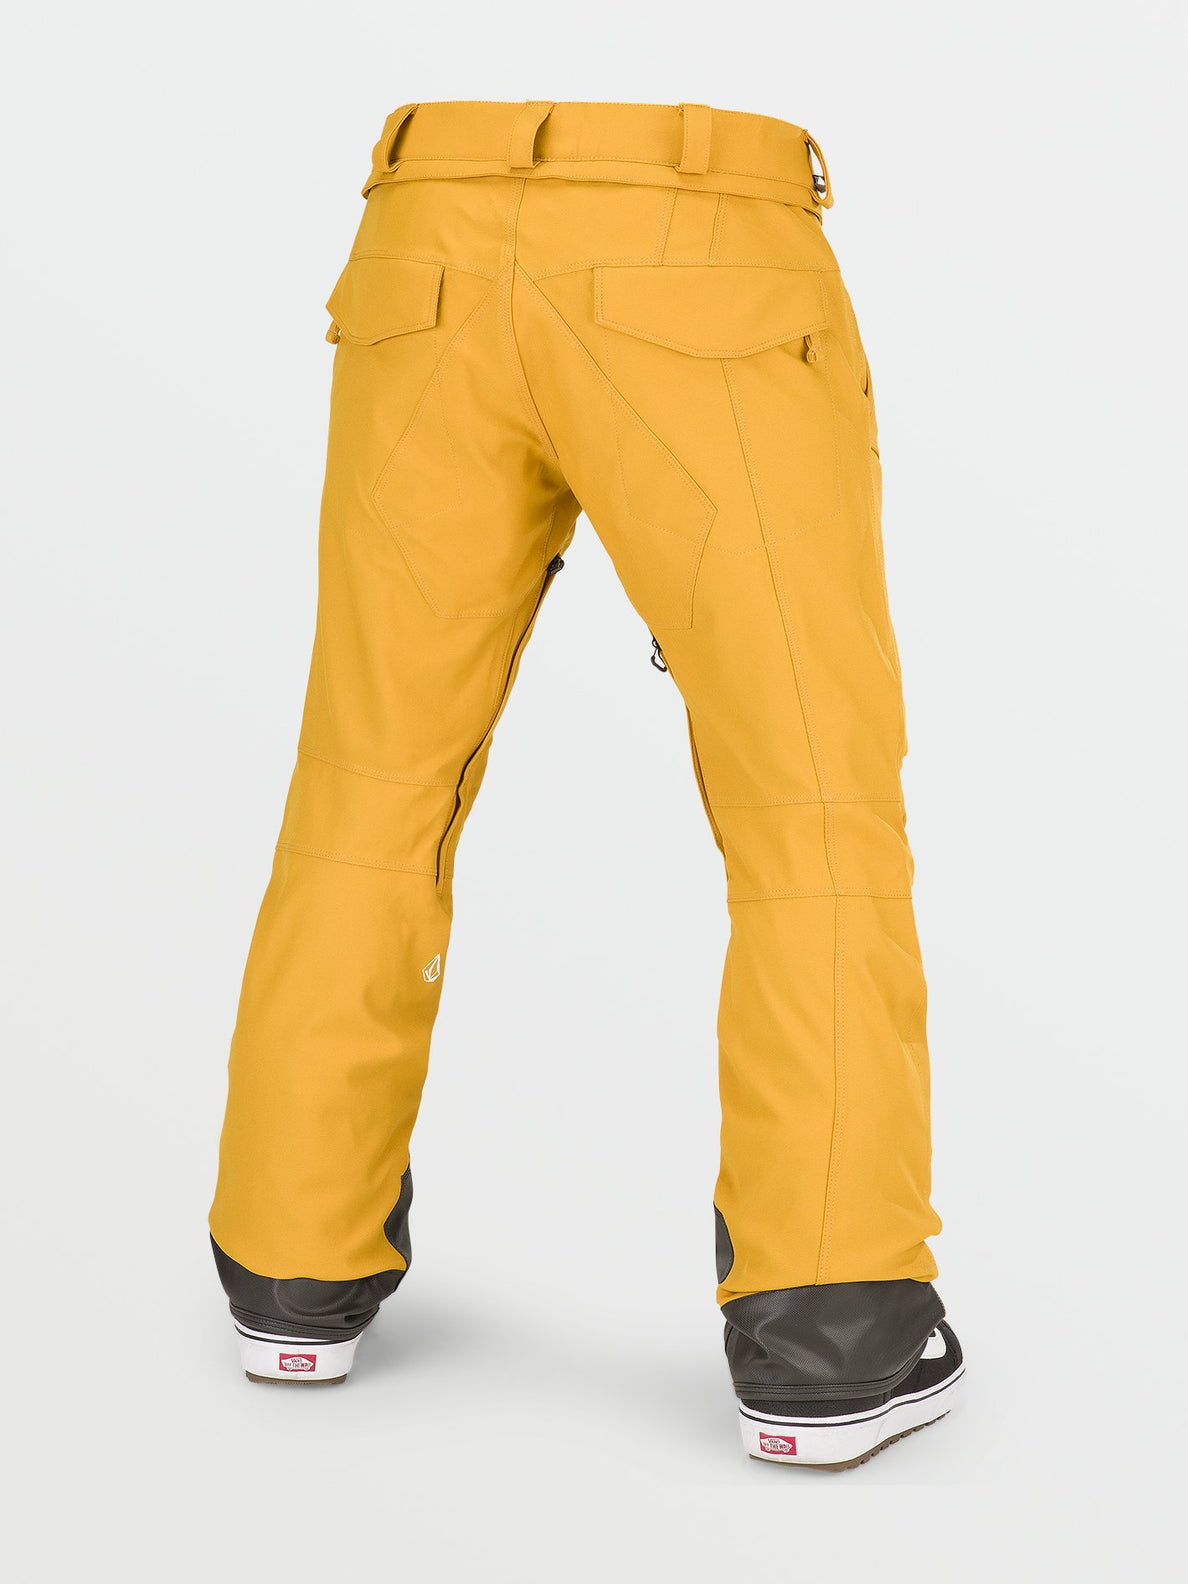 New Articulated Trousers - RESIN GOLD (G1352211_RSG) [B]